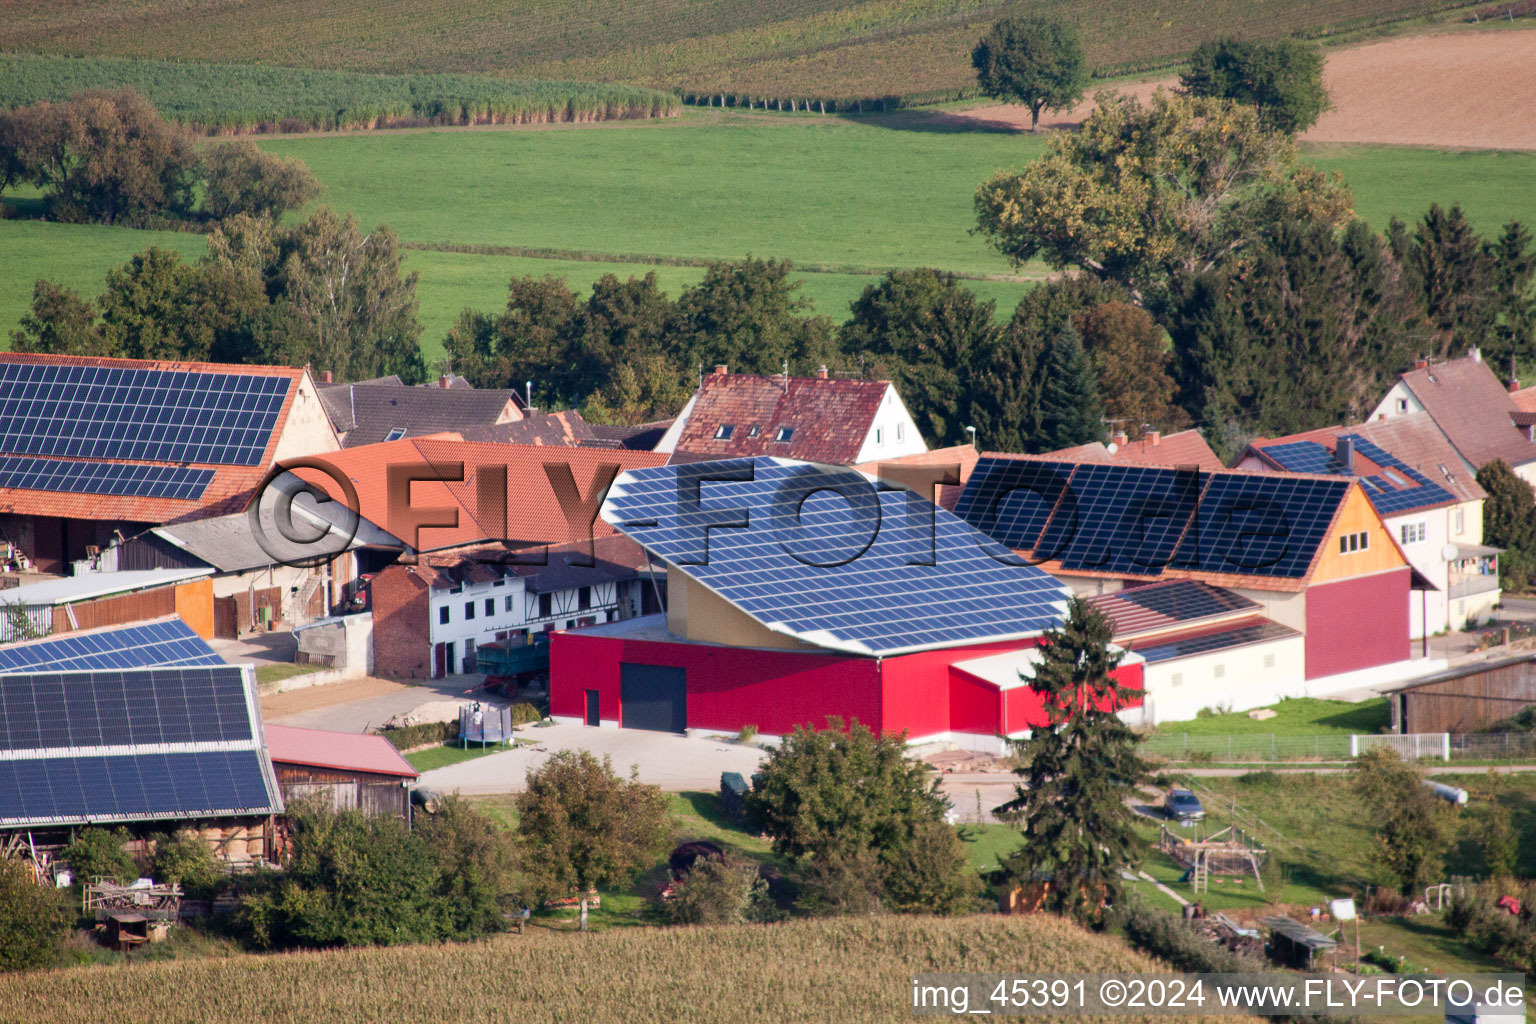 Oblique view of Panel rows of photovoltaic turnable roof of a stable in the district Deutschhof in Kapellen-Drusweiler in the state Rhineland-Palatinate